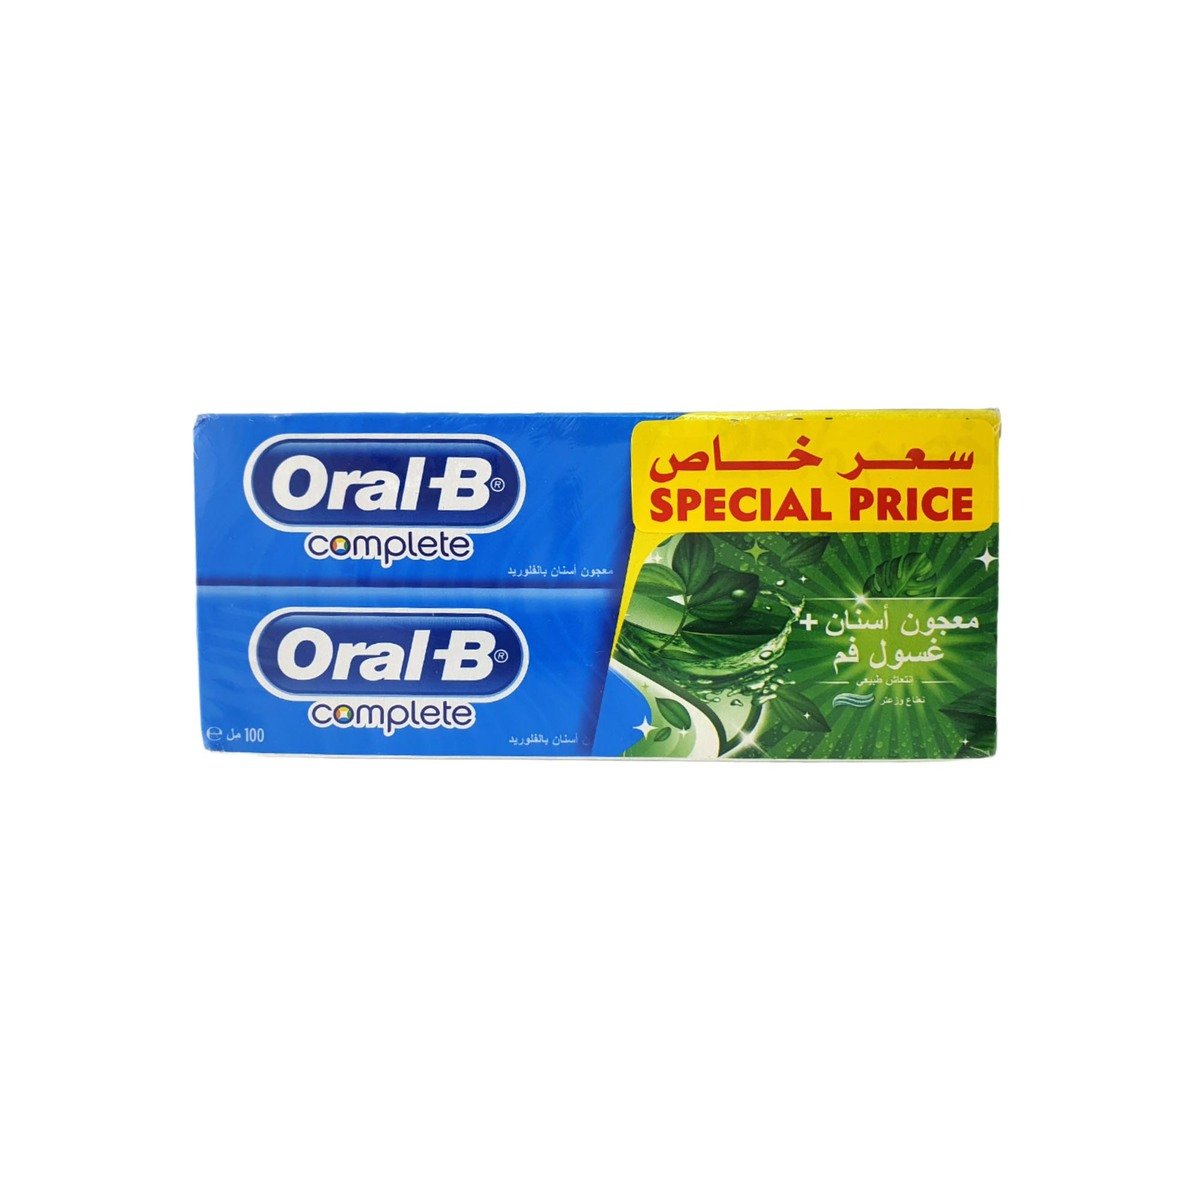 Oral B Complete Extreme Mint & Thyme Toothpaste Value Pack 4 x 100ml